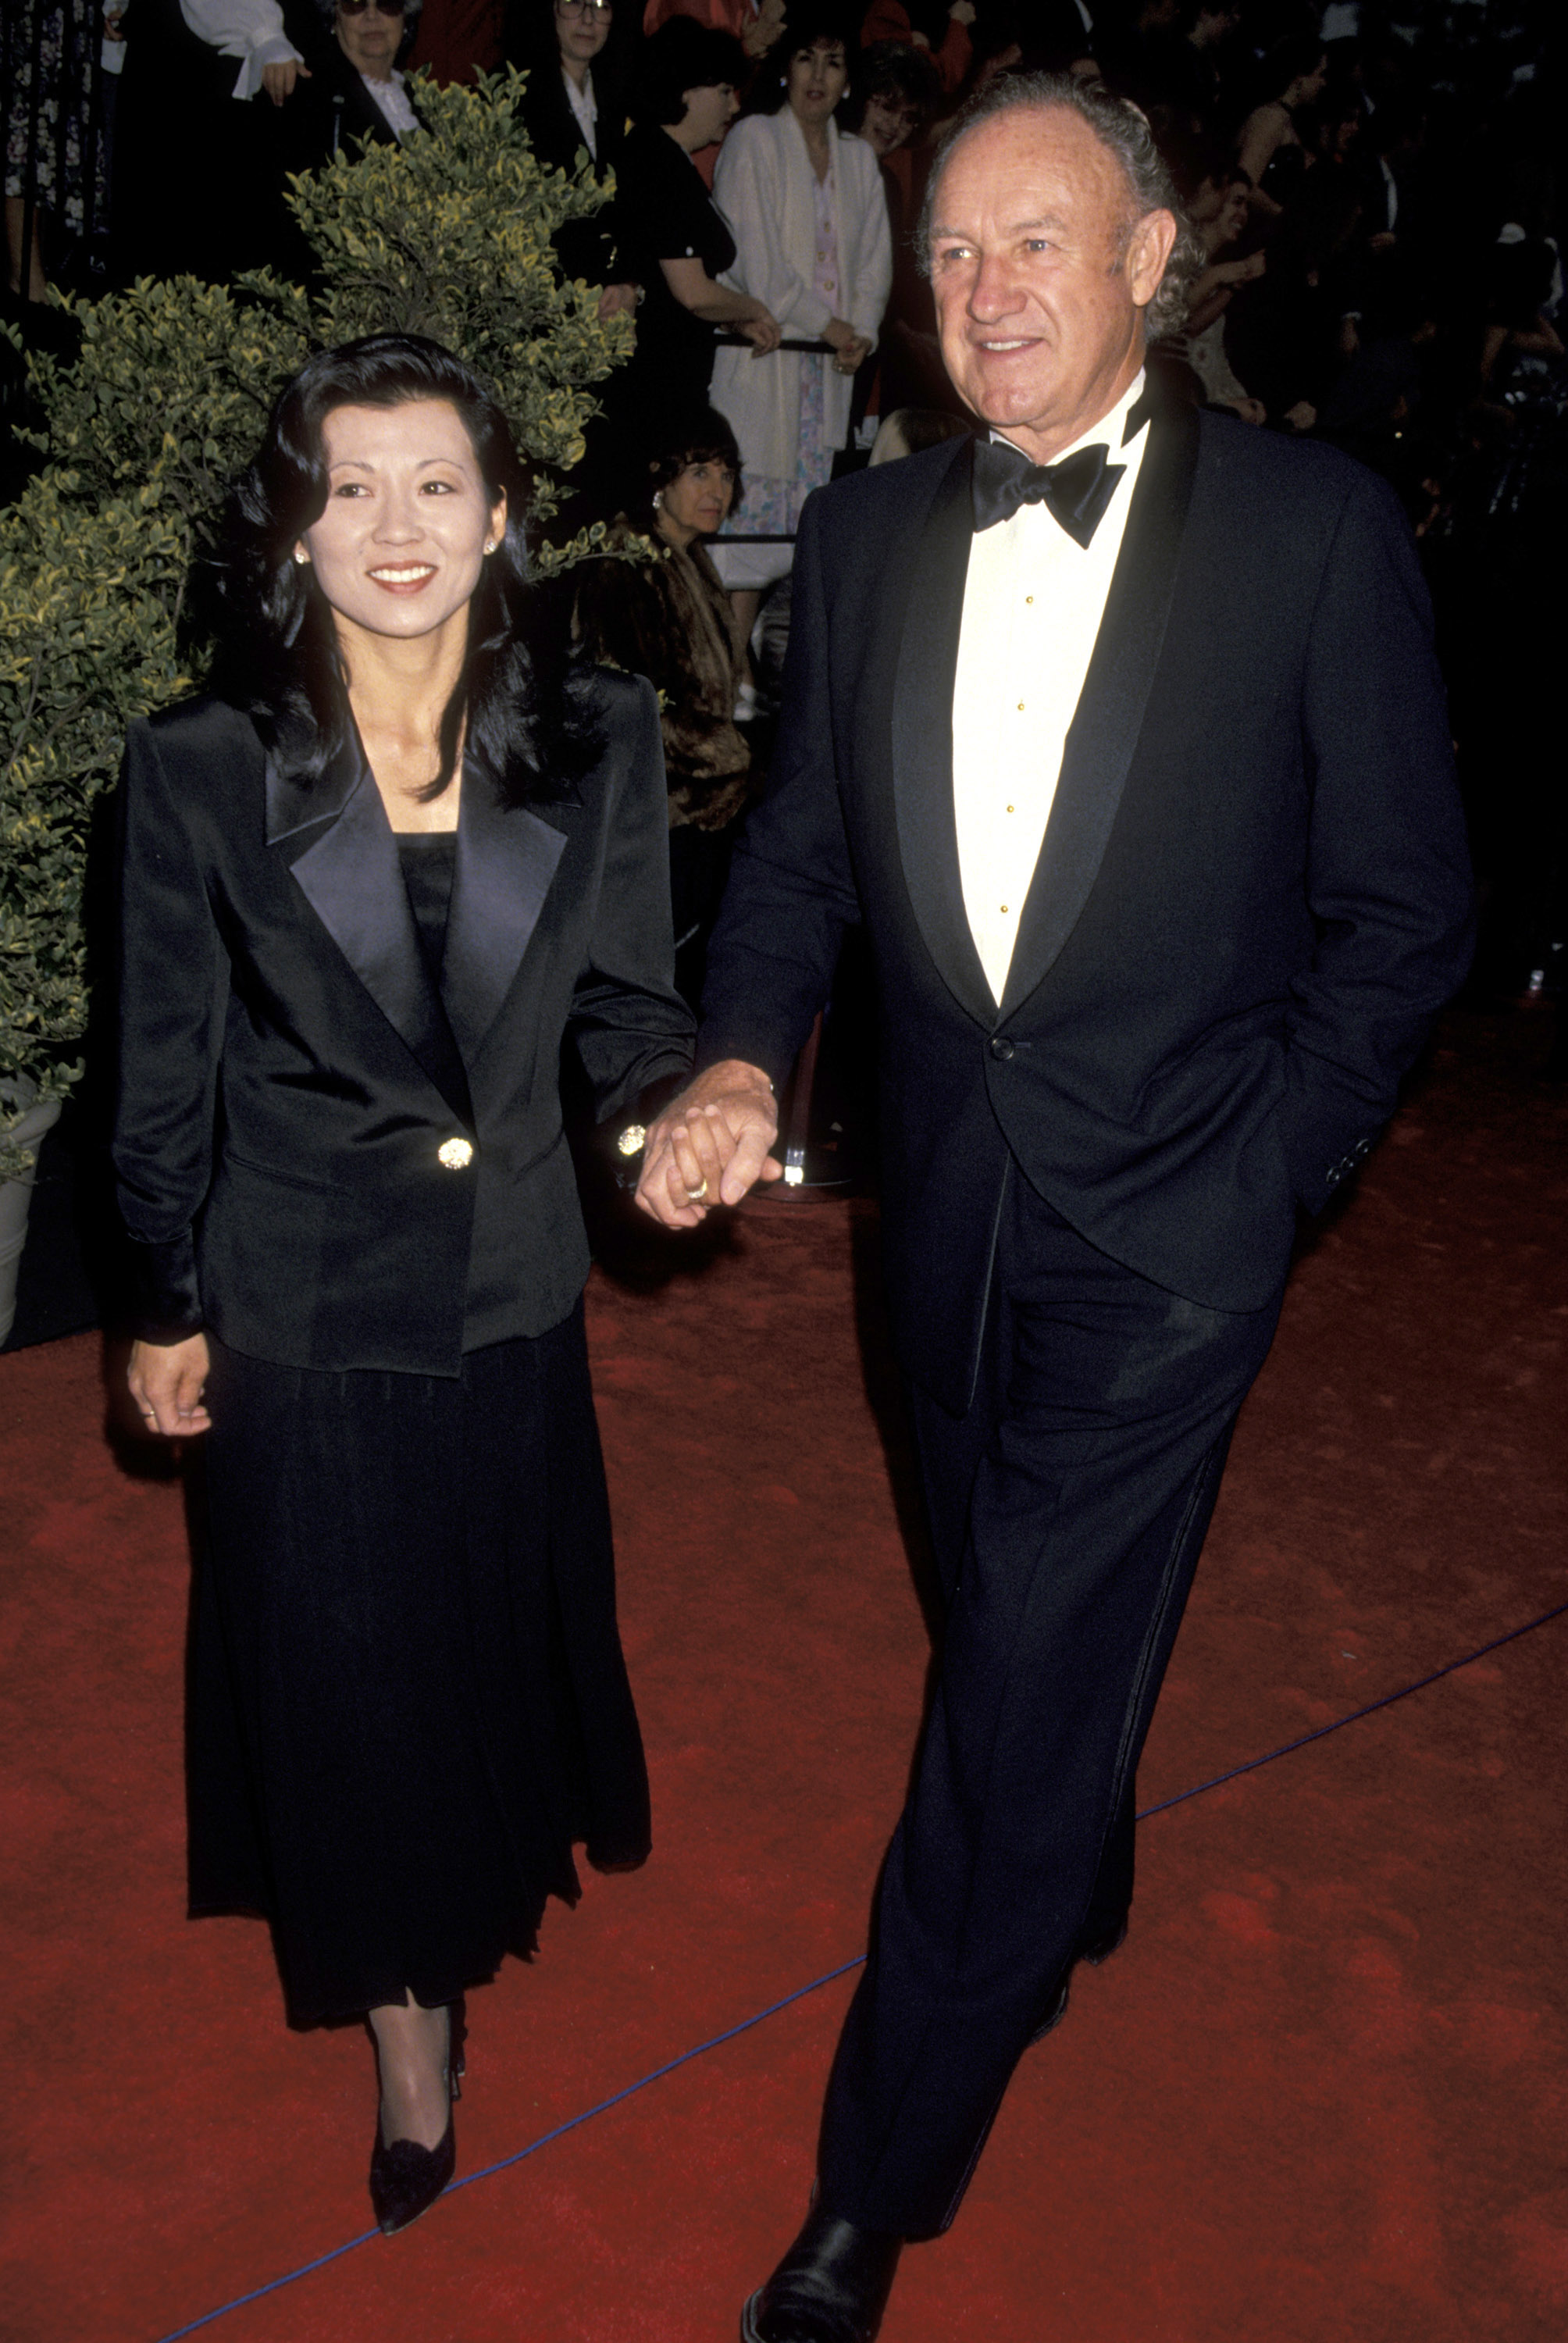 Betsy Arakawa and Gene Hackman at the 20th Annual People's Choice Awards in Culver City, California, on March 8, 1994 | Source: Getty Images